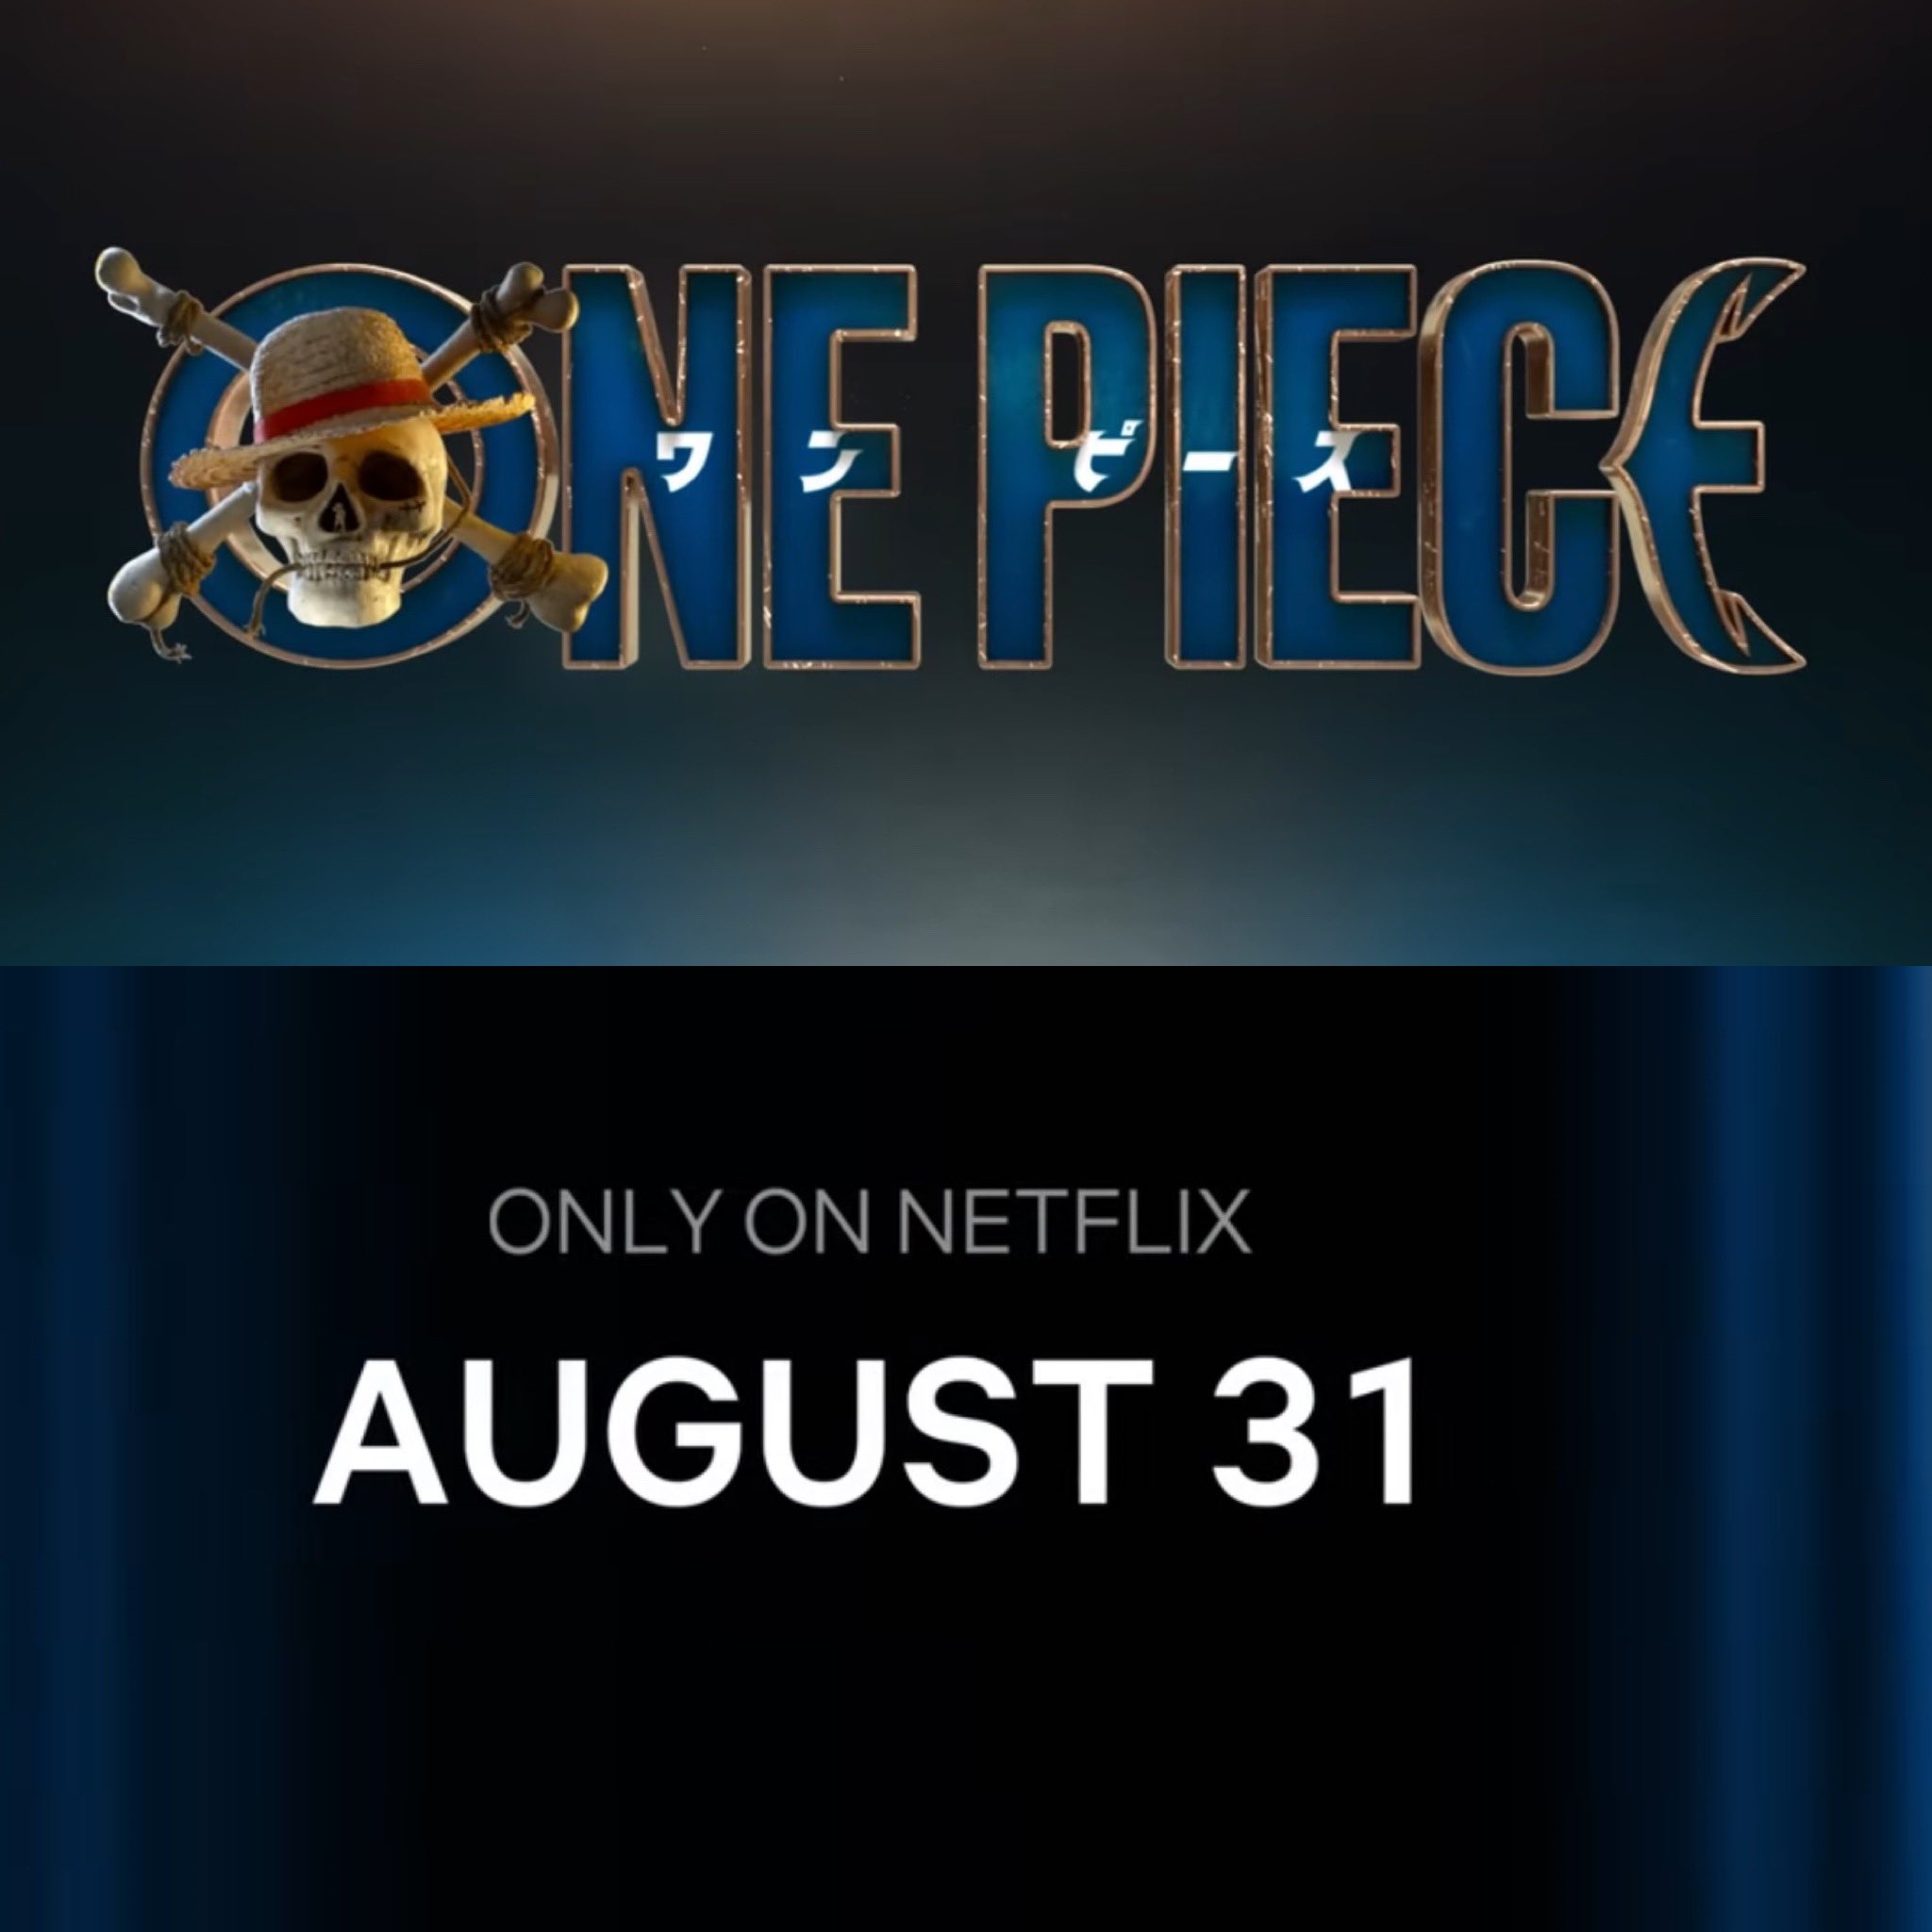 DisTrackers on X: One Piece Netflix Teaser is out!